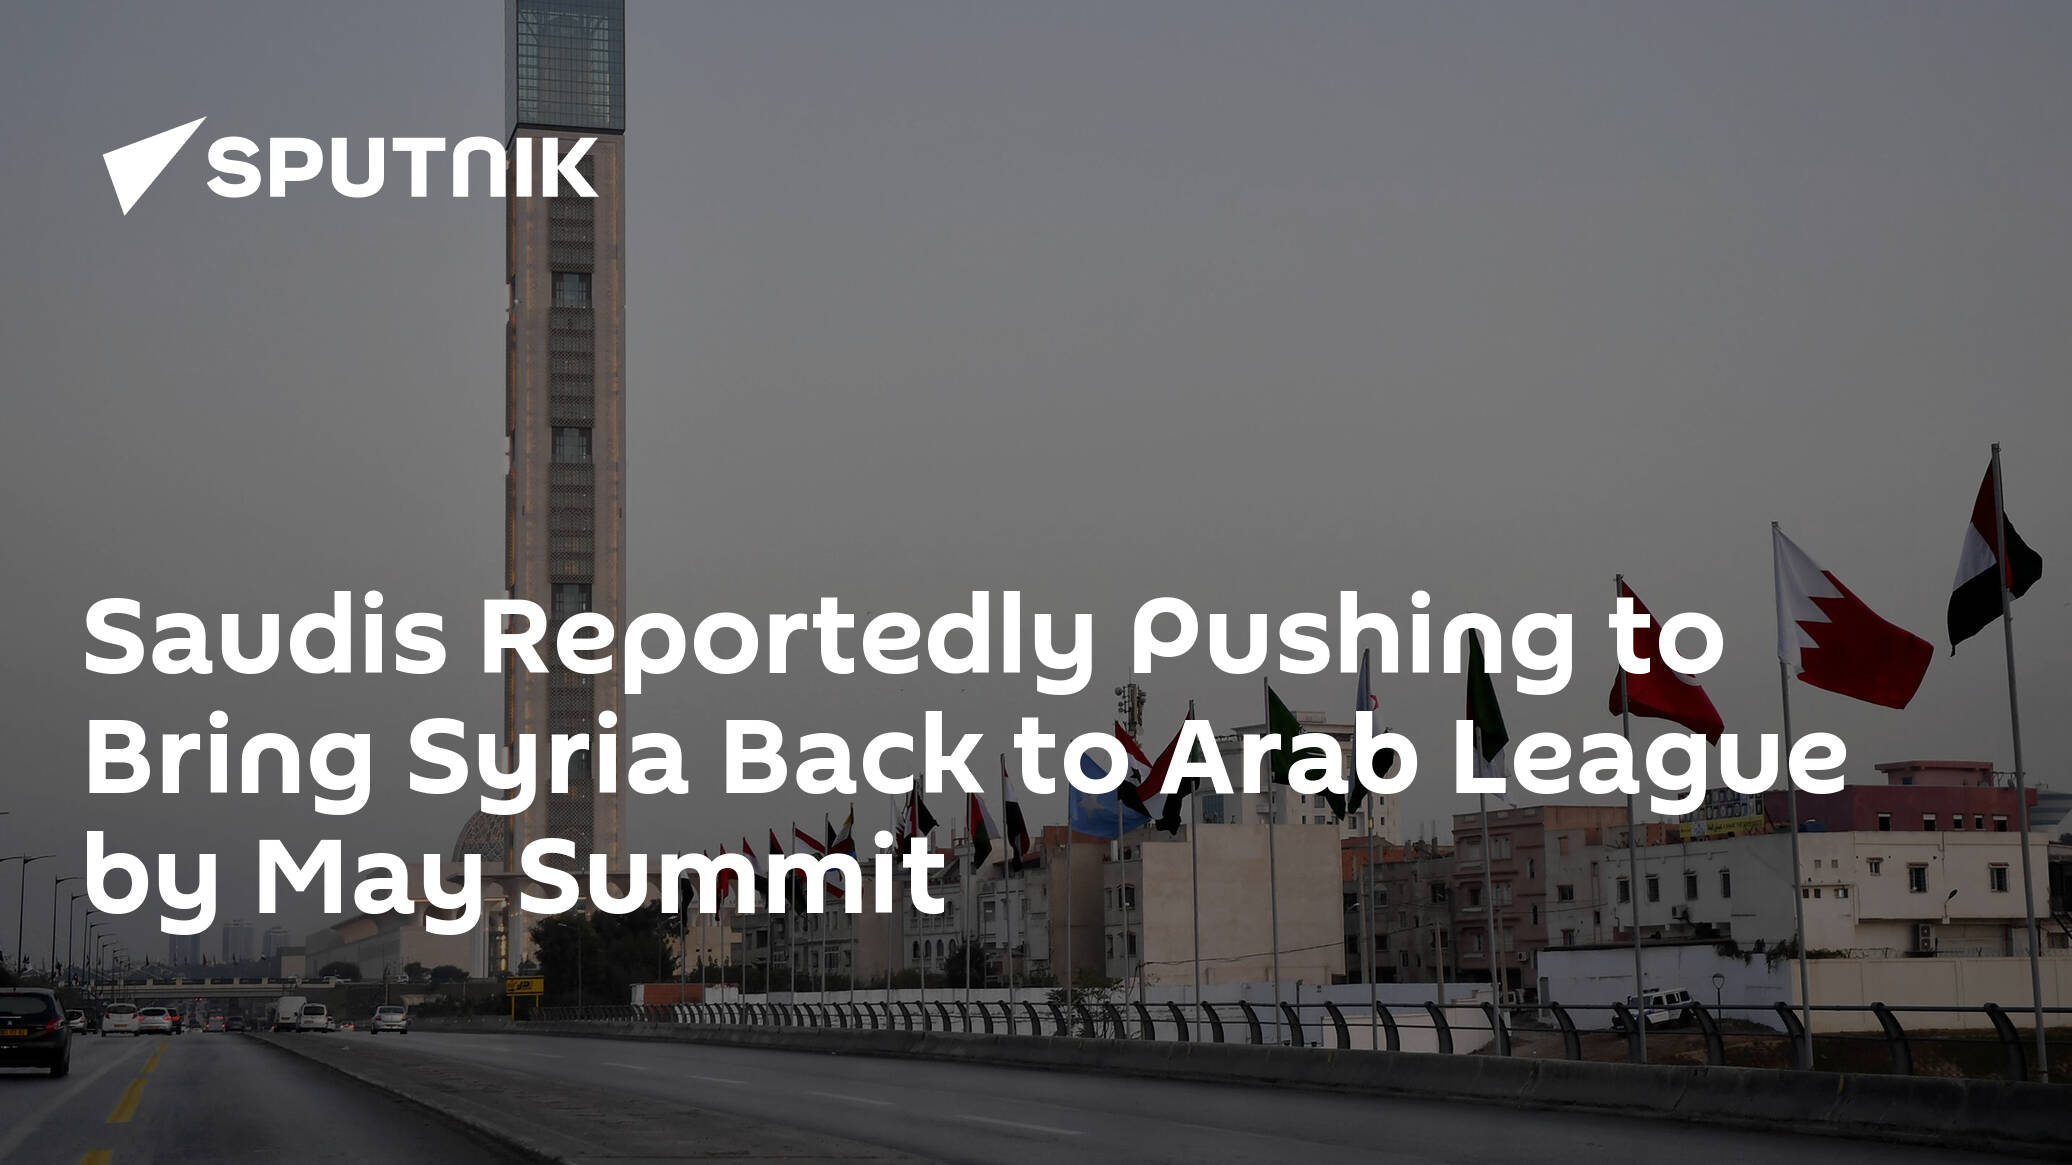 Saudis Reportedly Pushing to Bring Syria Back to Arab League by May Summit